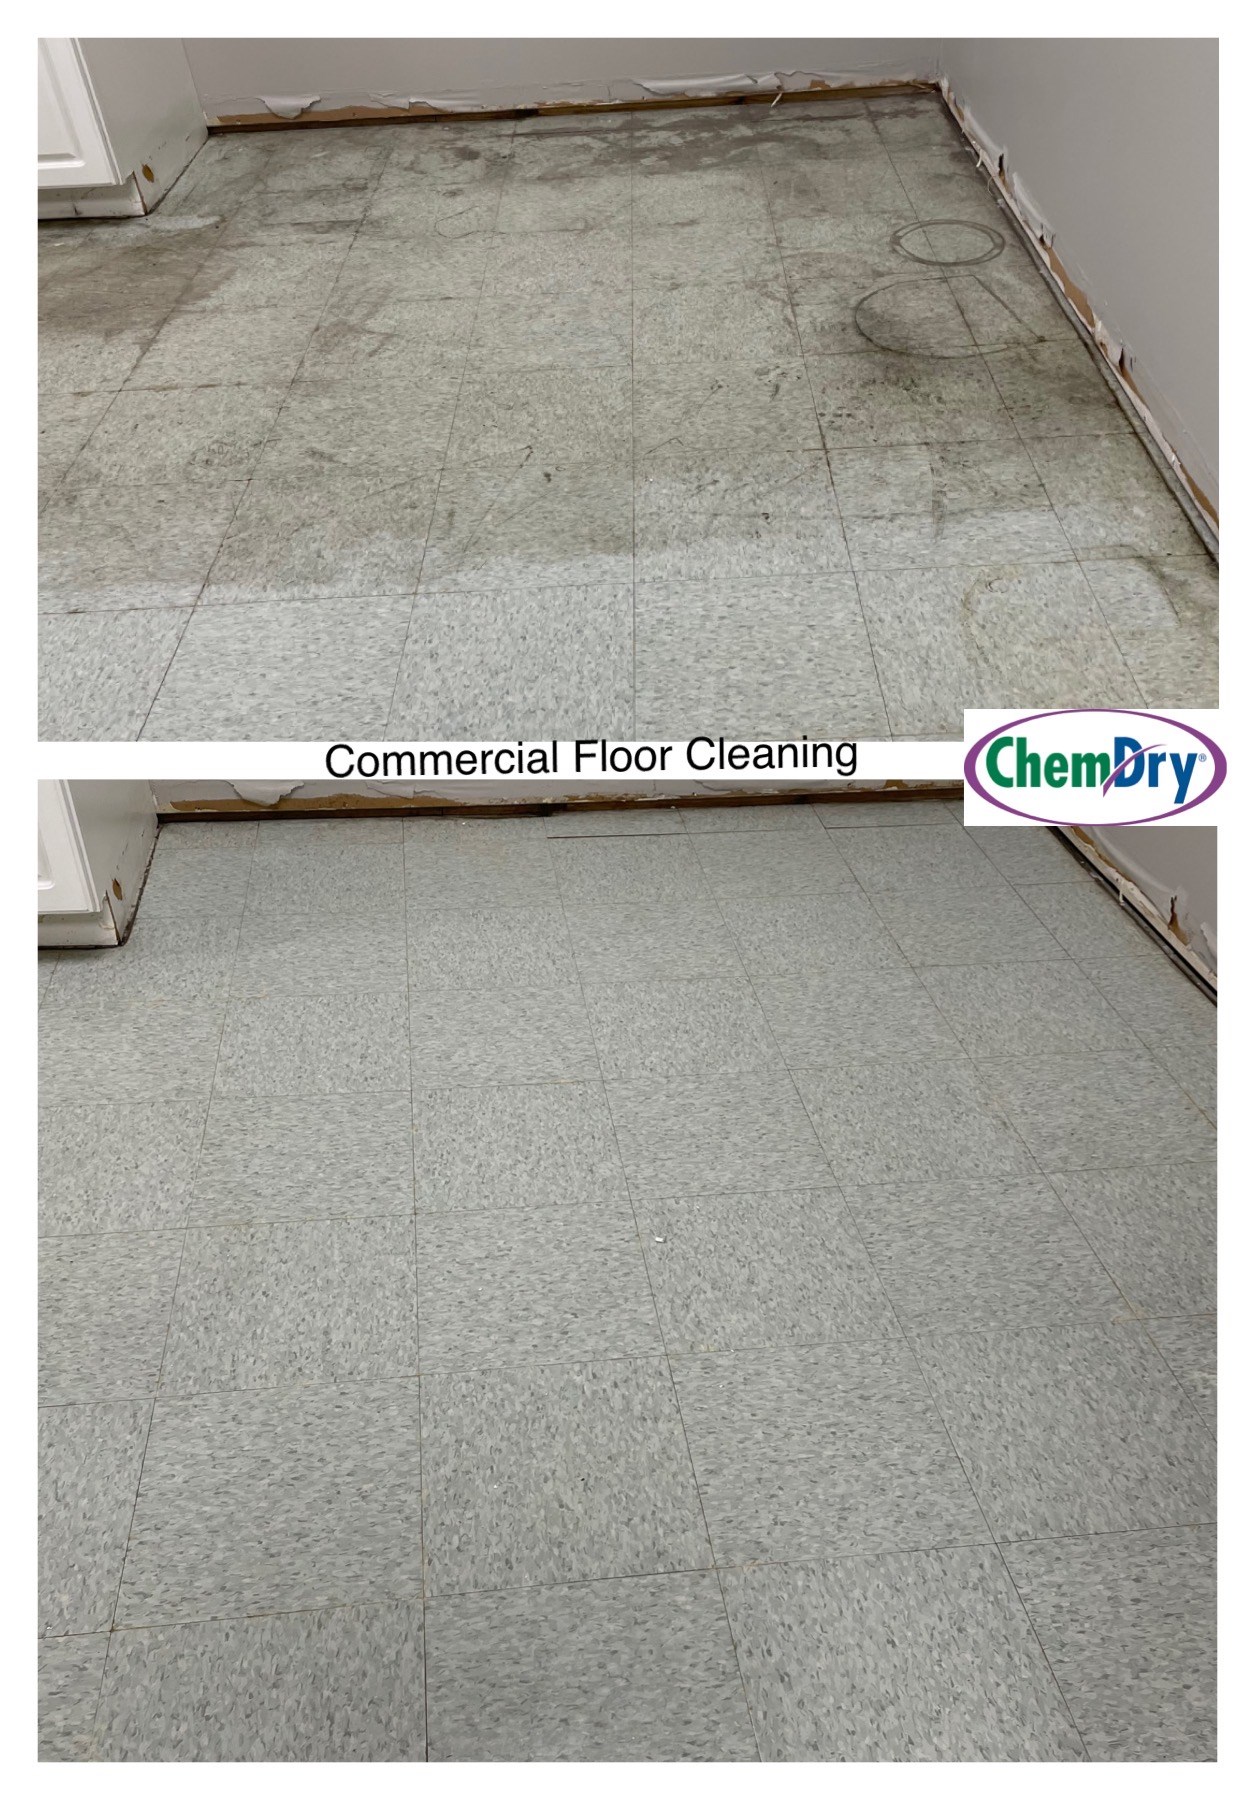 VCT Floor Cleaning